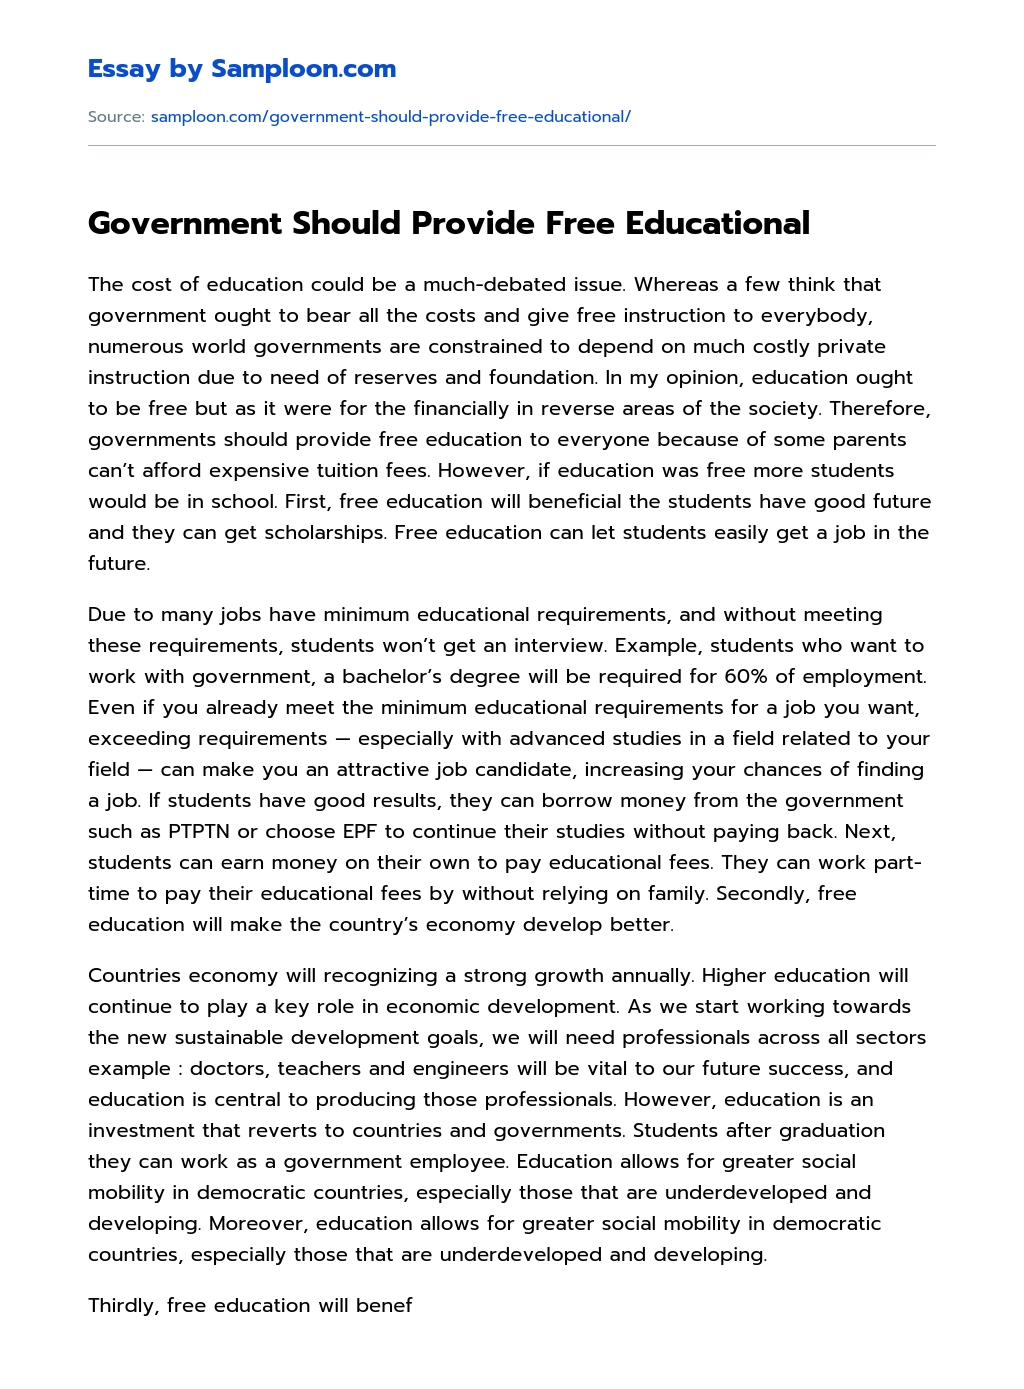 Government Should Provide Free Educational essay